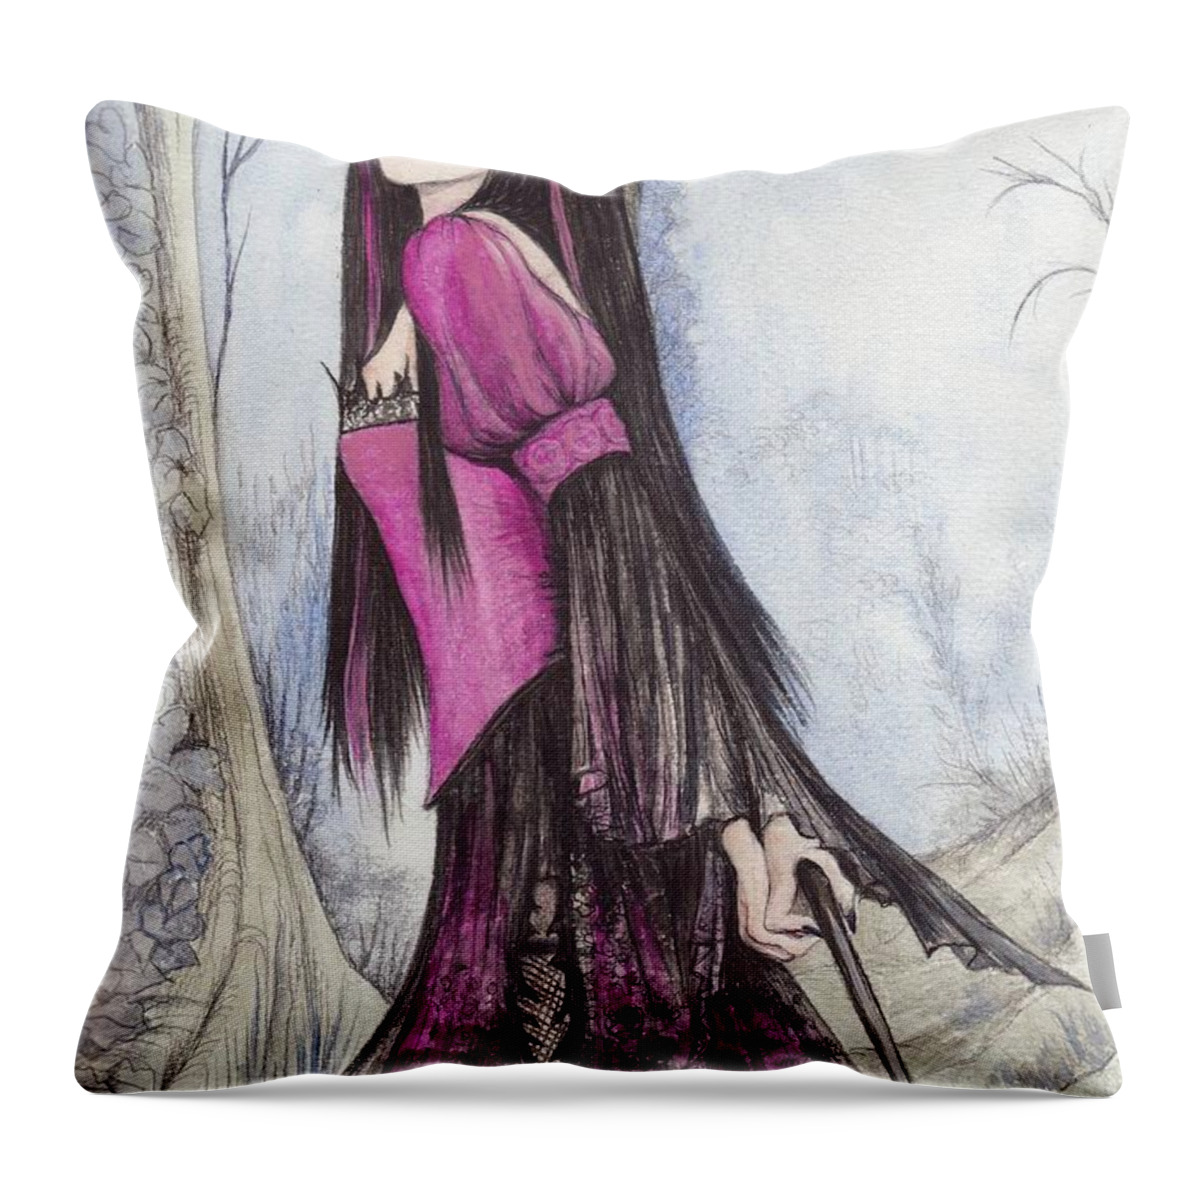 Witch Throw Pillow featuring the painting Mis Witch by Morgan Fitzsimons